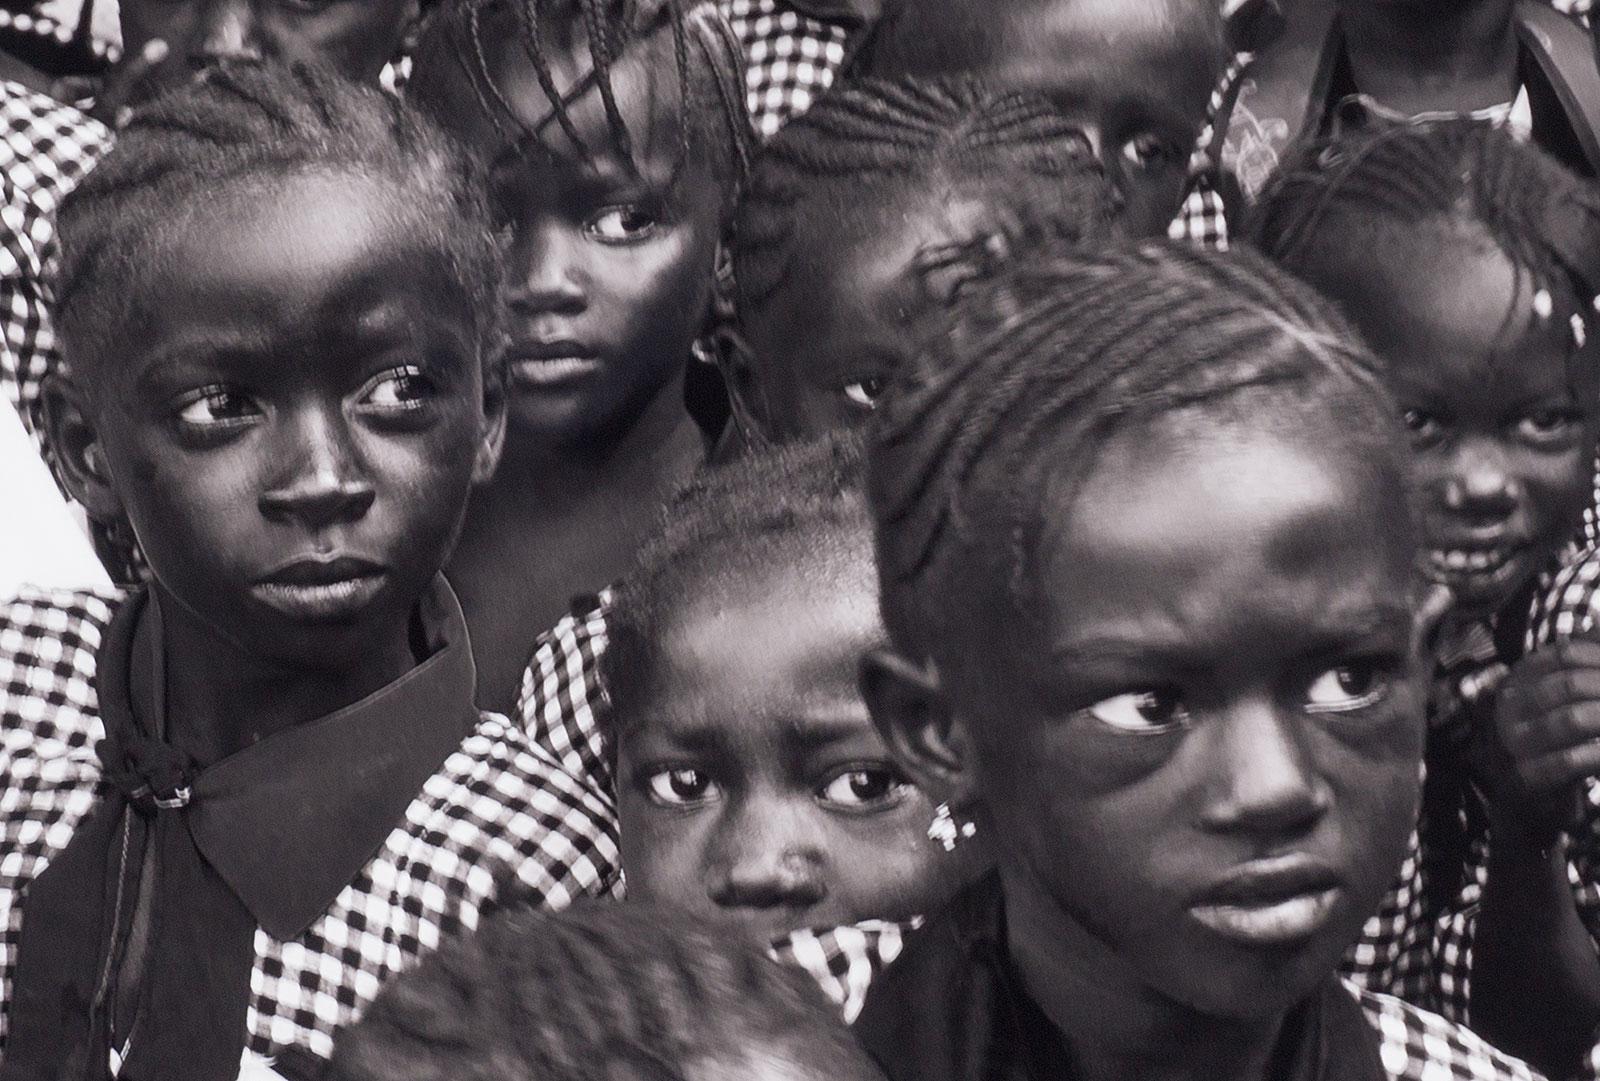 Black and White (School children in Gambia, West Africa) - Photograph by Benno Thoma